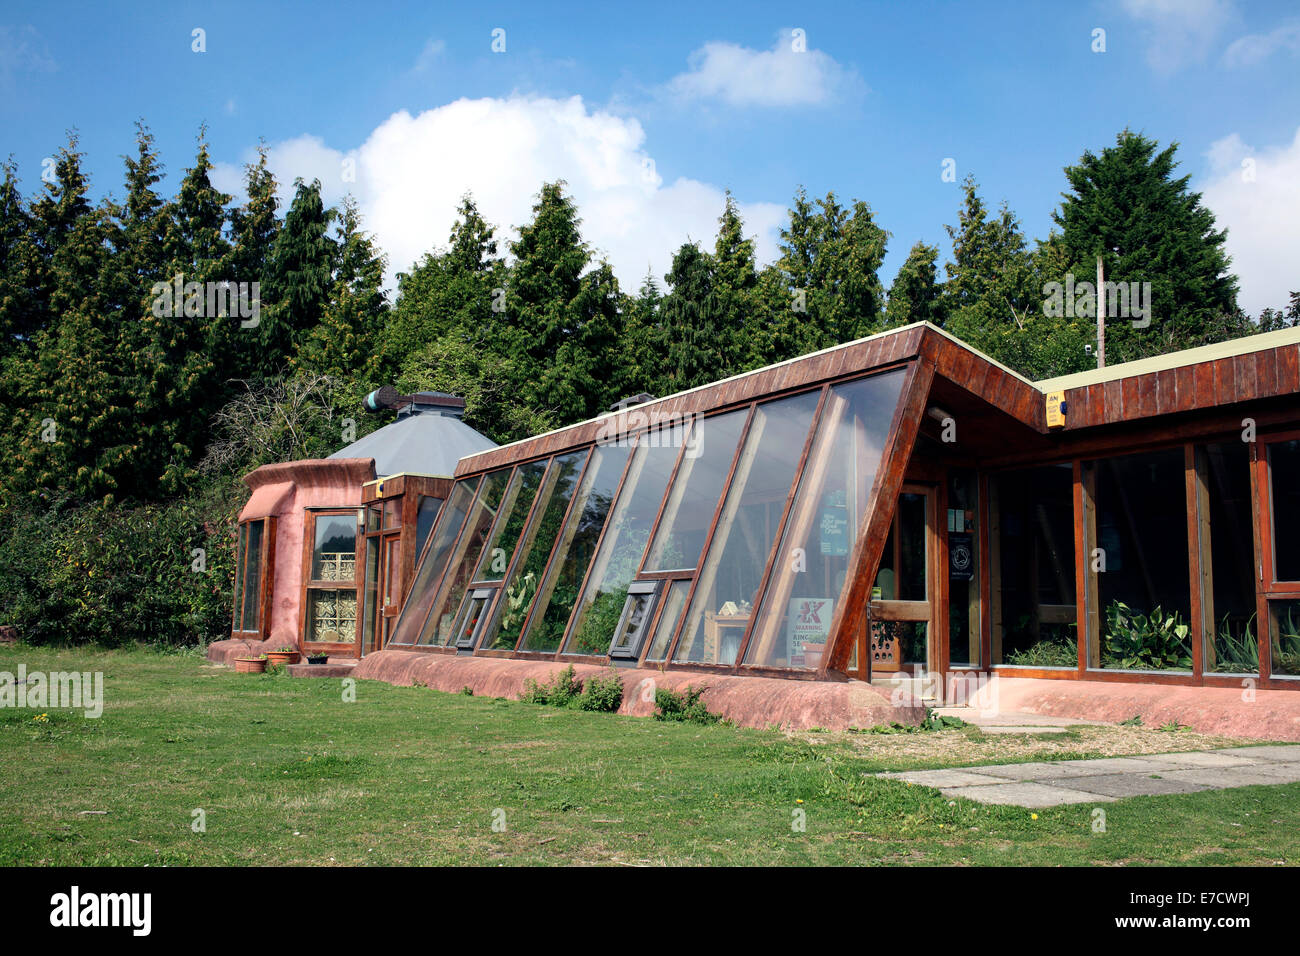 Le Brighton Earthship, Stanmer, Brighton. Banque D'Images